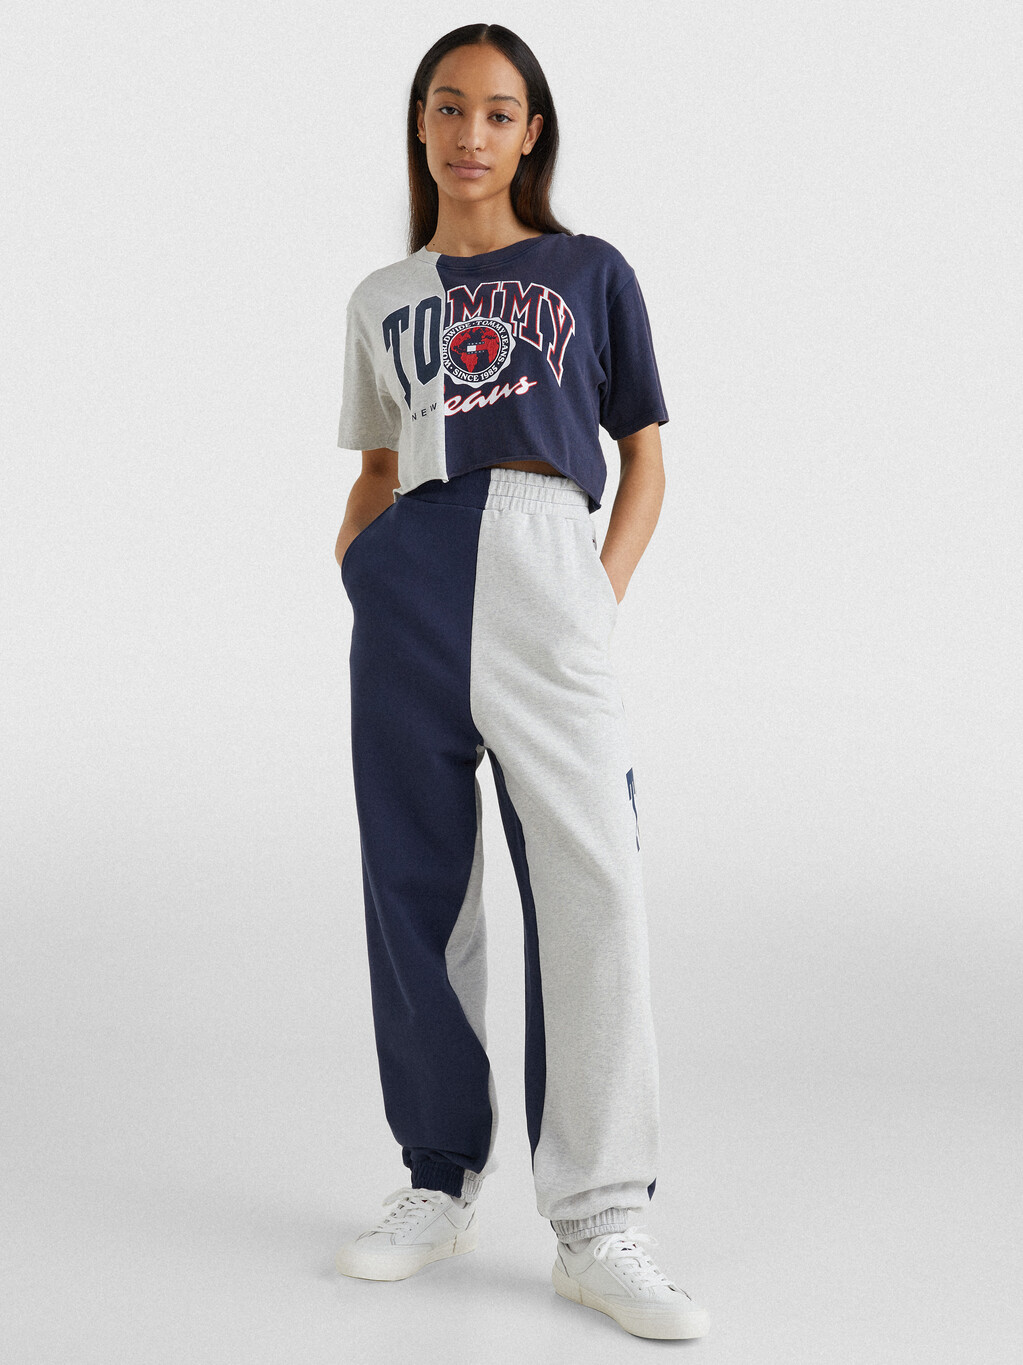 Buy SPLICED LOGO CROPPED T-SHIRT in color NAVY